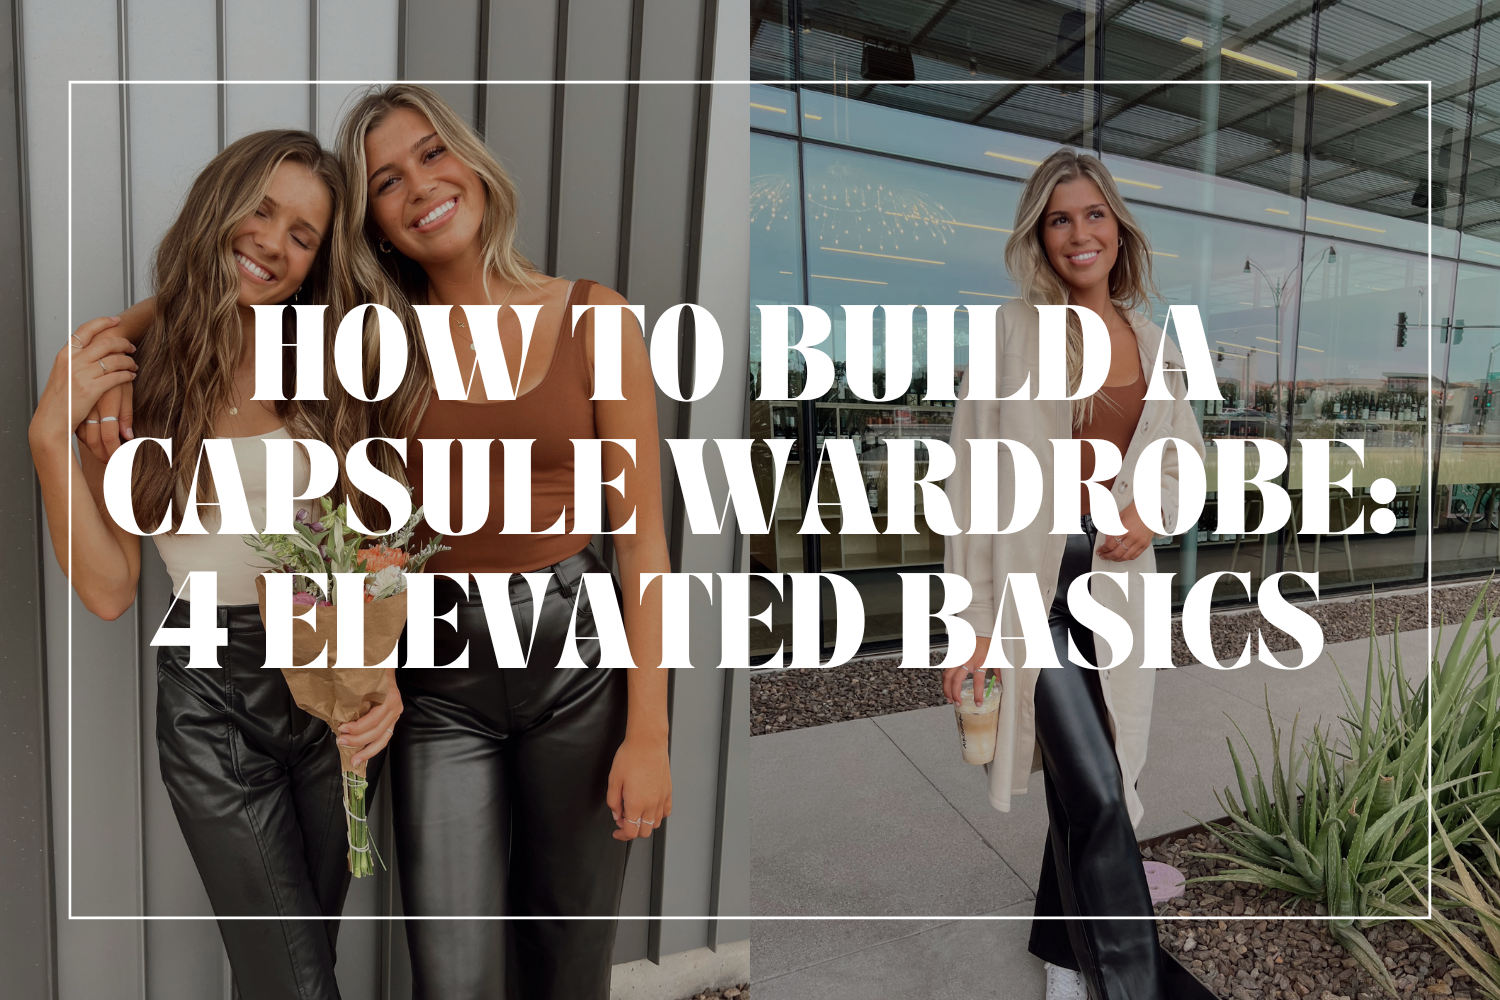 How To Build A Capsule Wardrobe: 4 Elevated Basics